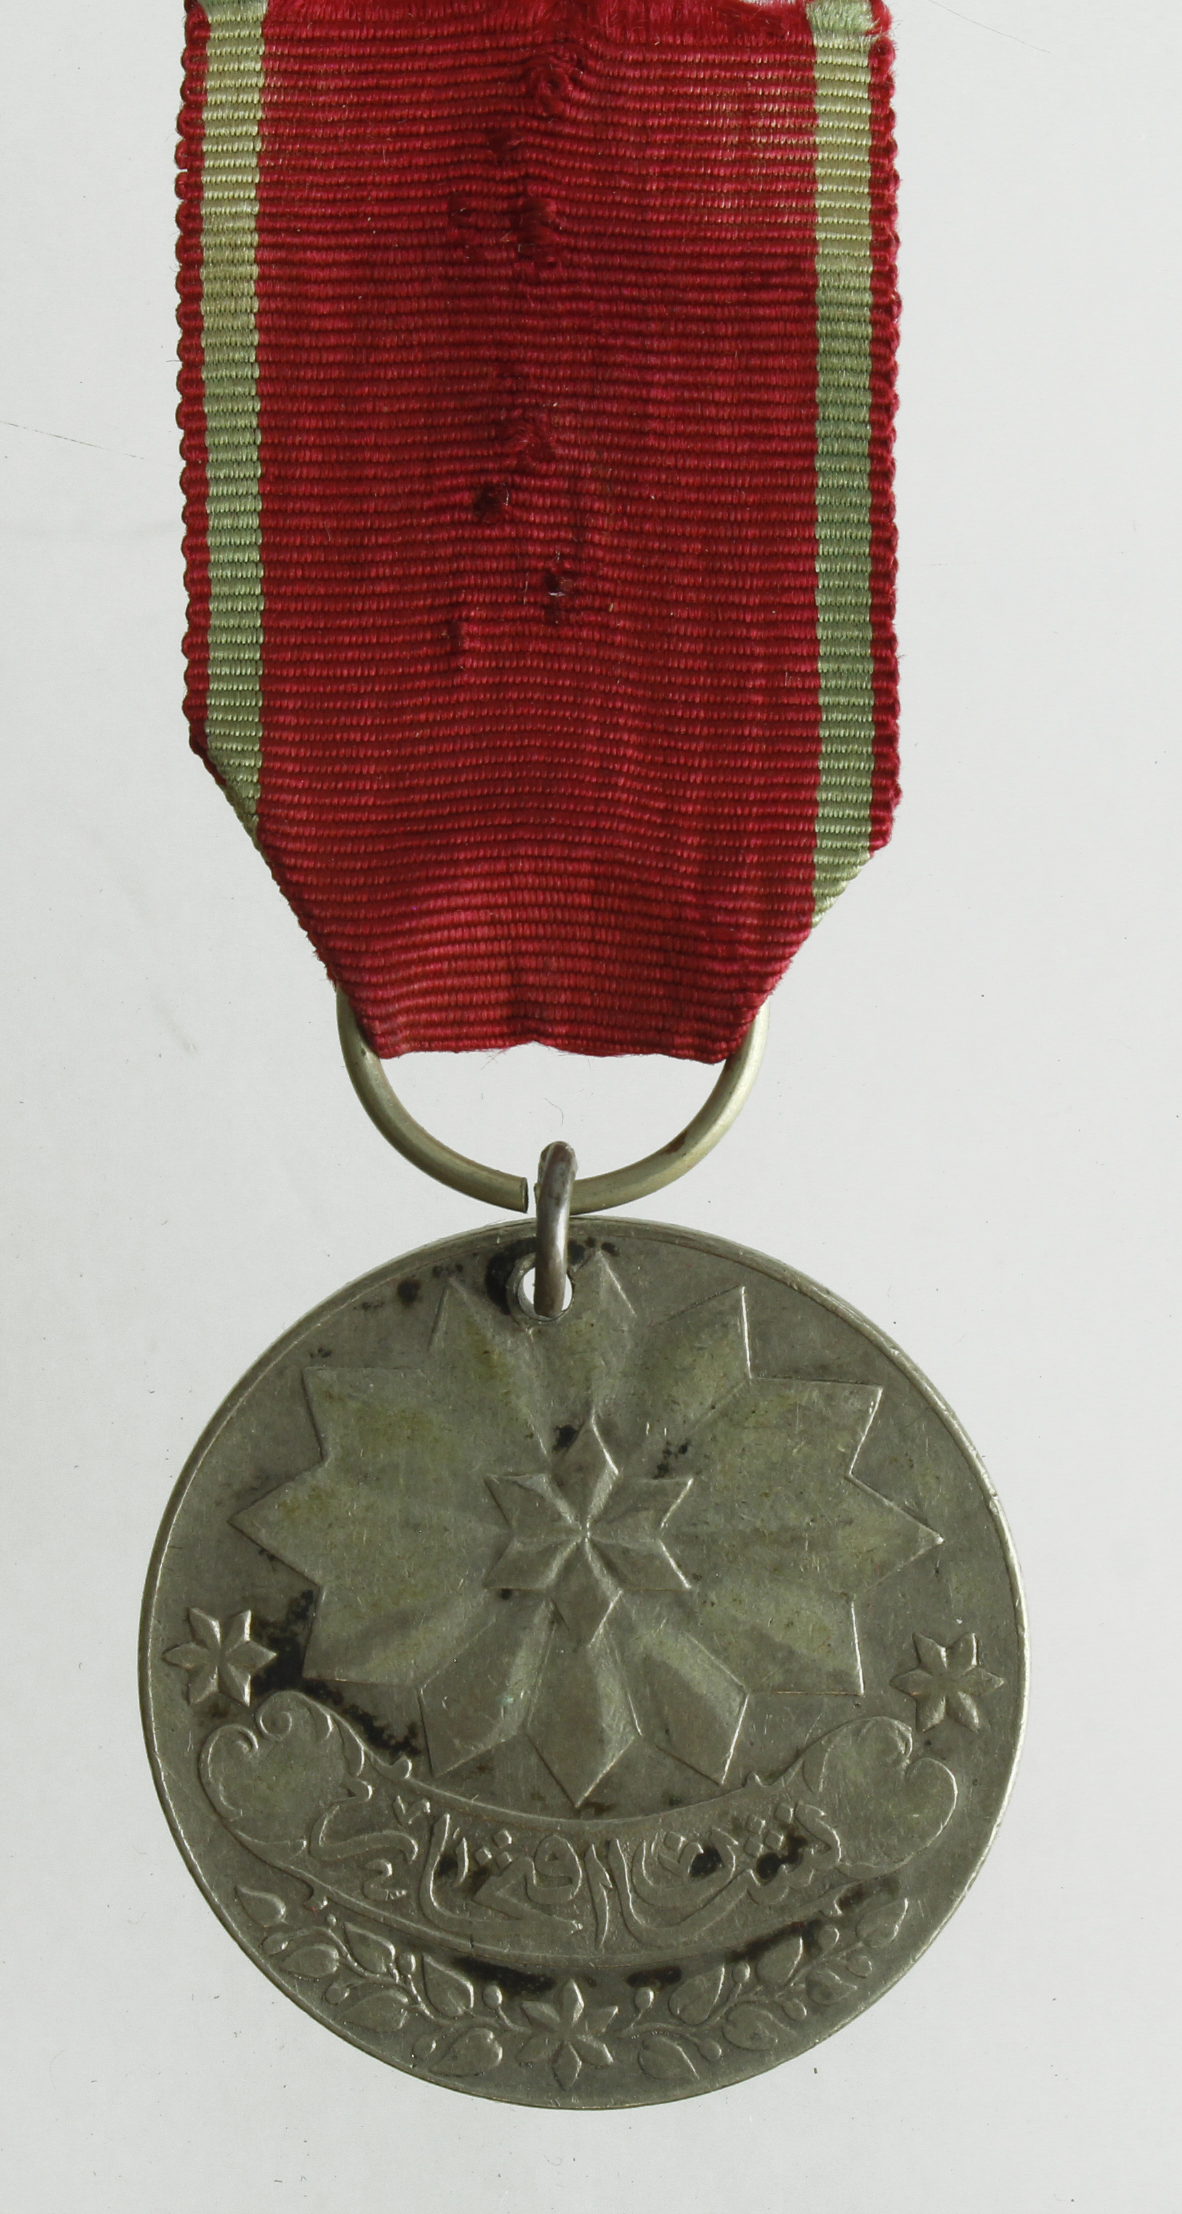 Turkish Medal for Glory 1853, silver